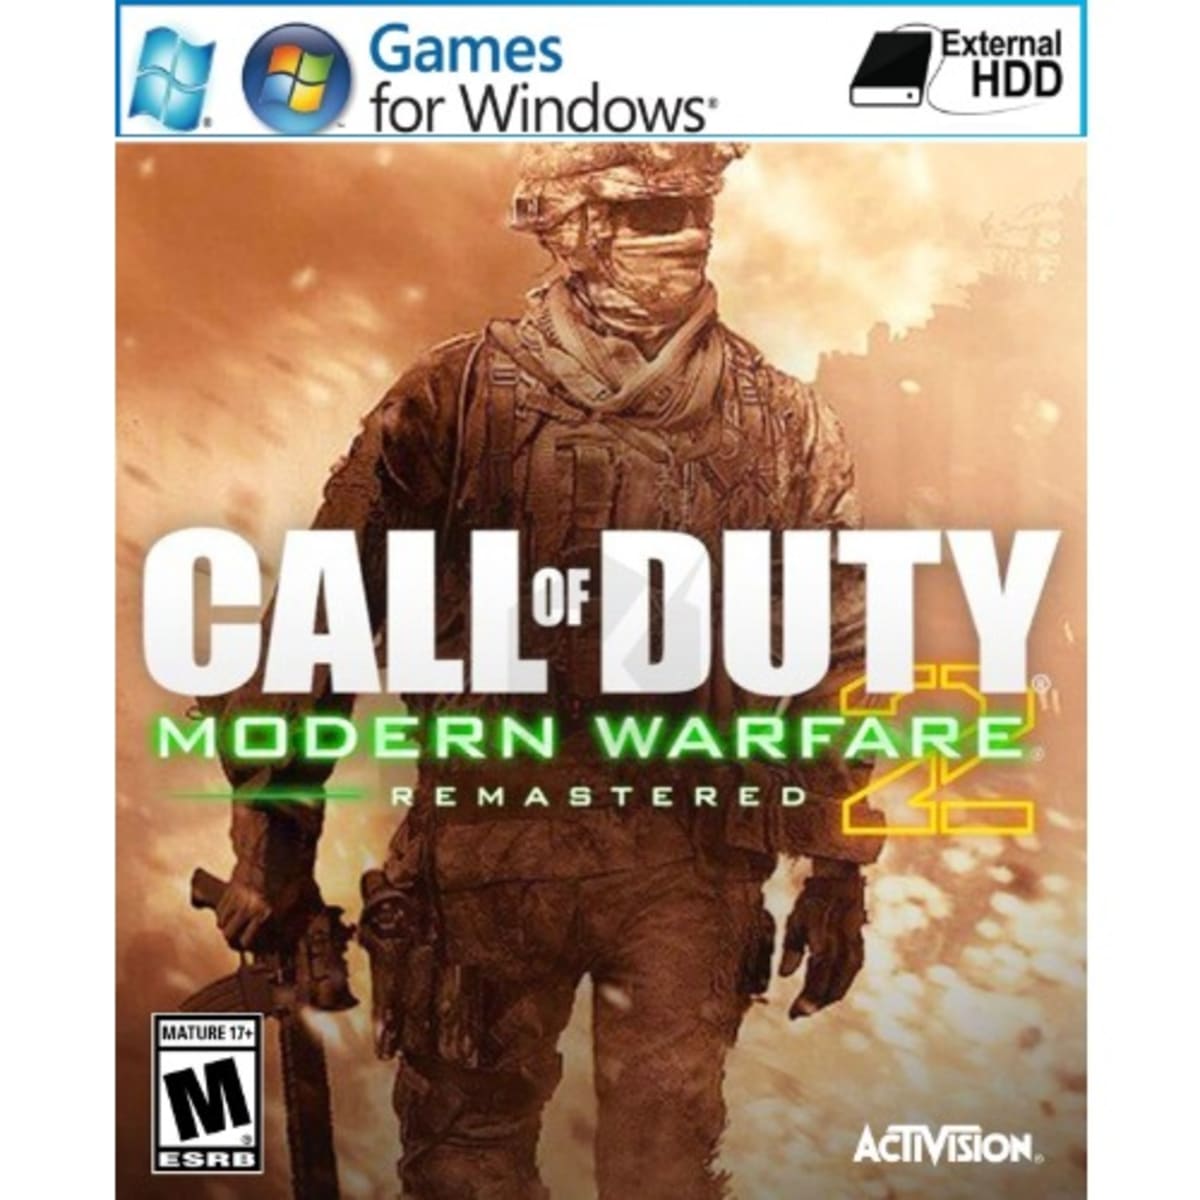 Call of Duty Modern Warfare 2 Campaign Remastered PC Game - Free